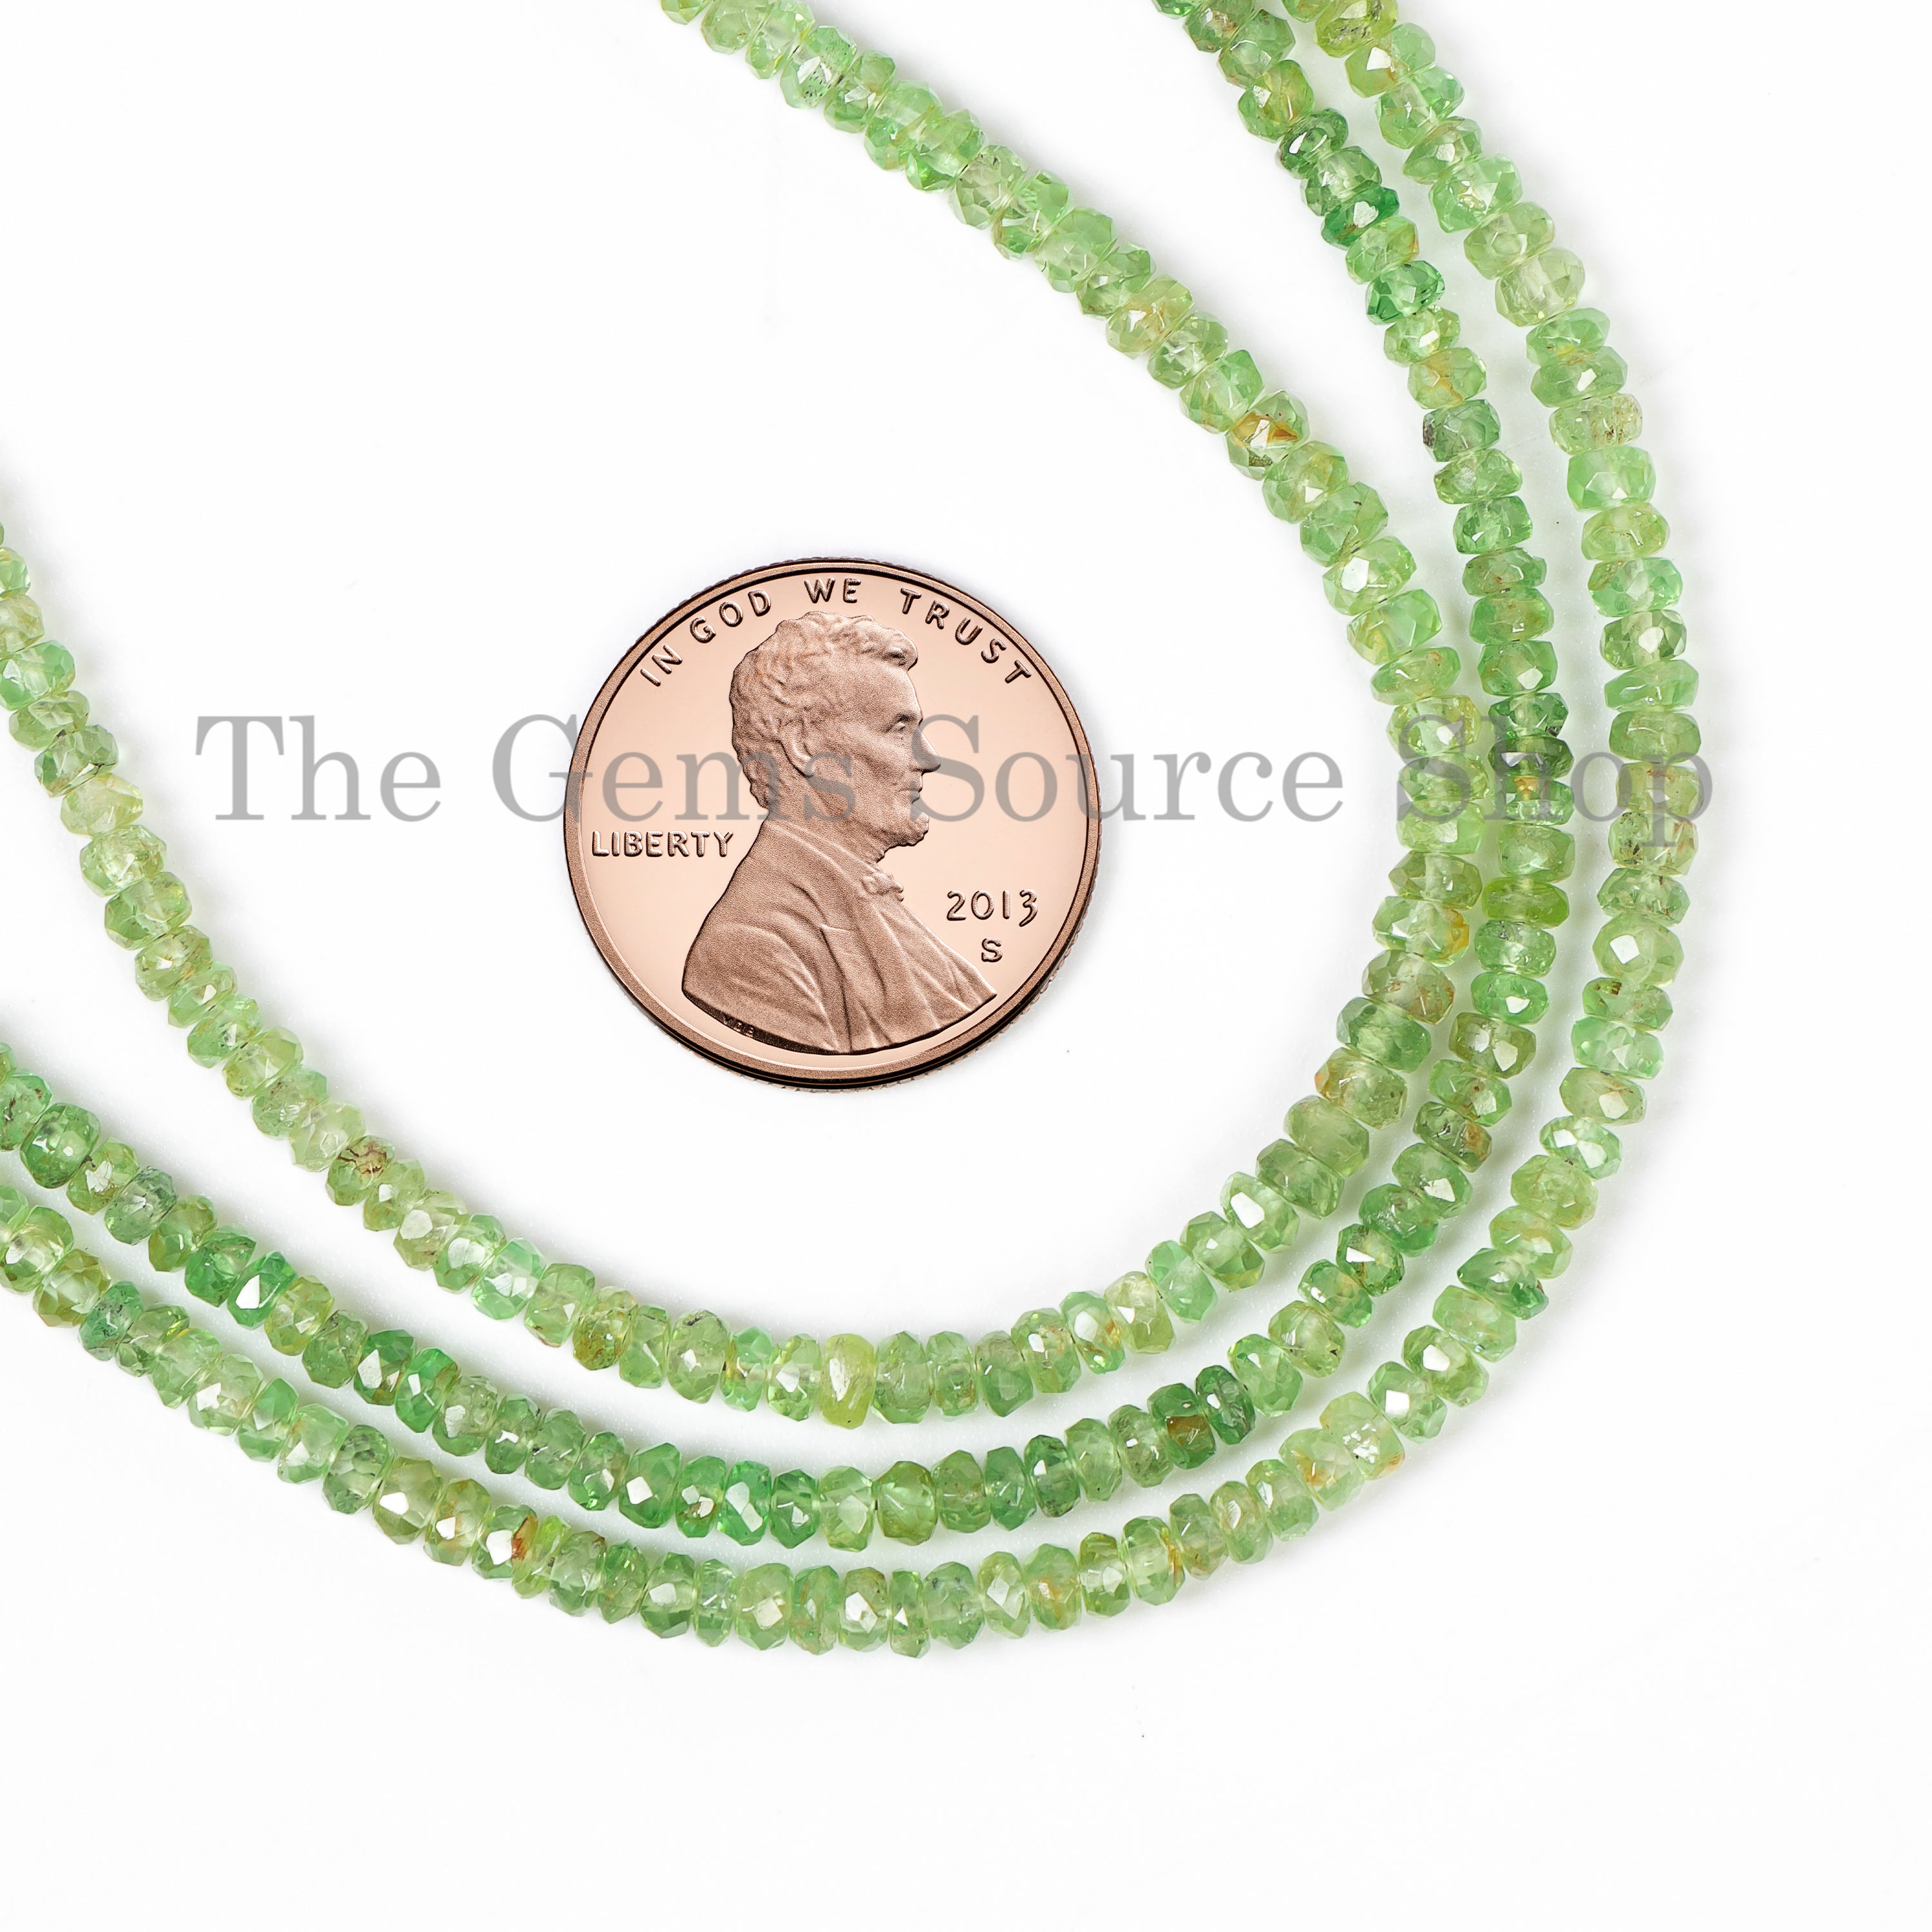 3-4MM Tsavorite faceted rondelle shape beads Strand 16 INCHES TGS-4828